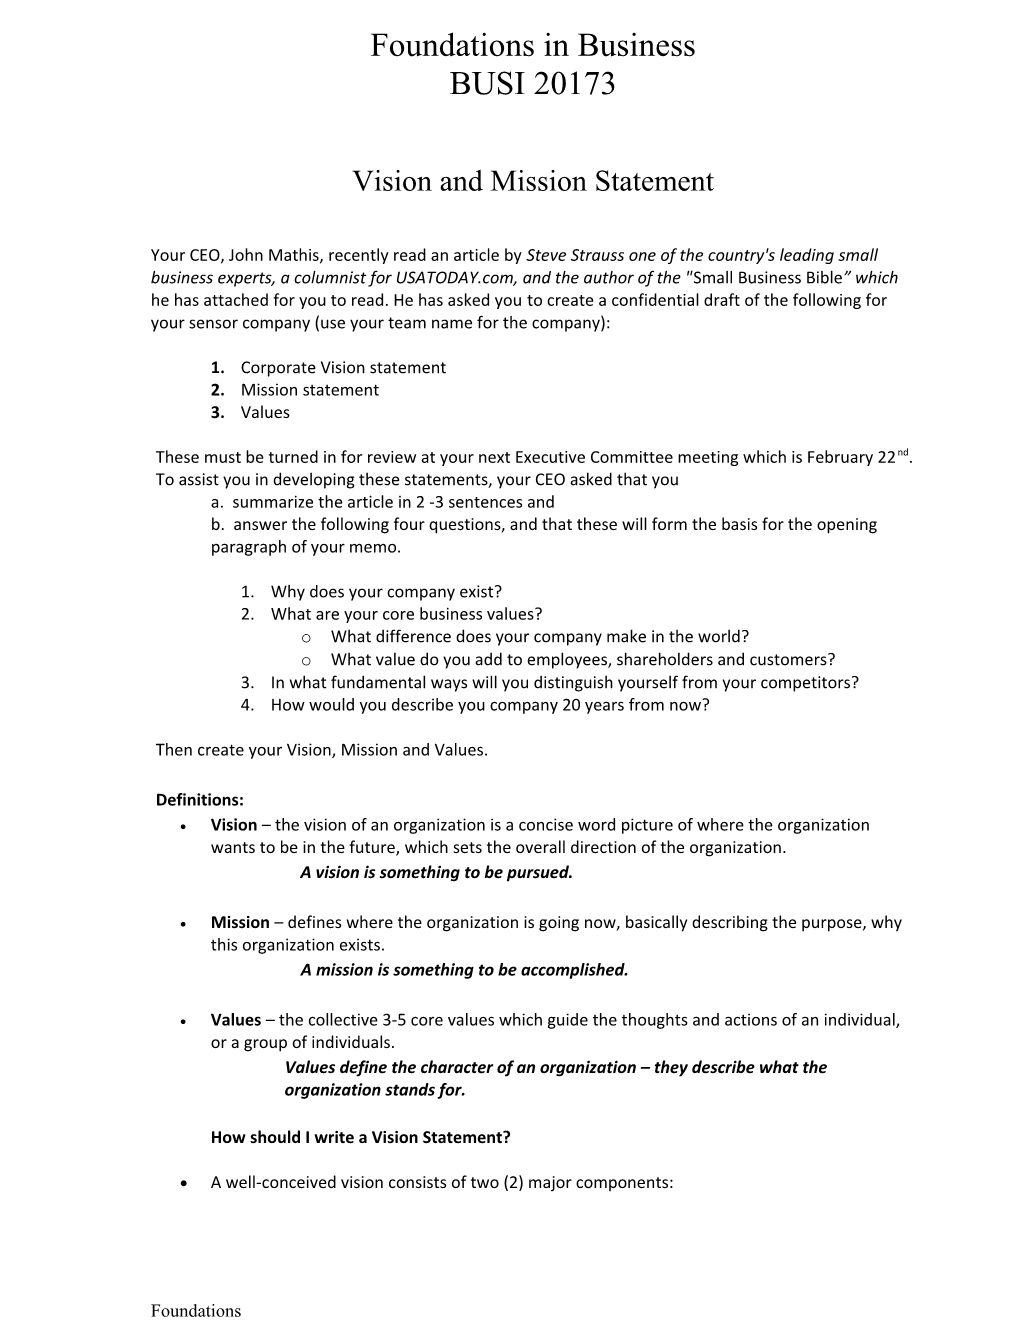 Vision and Strategy Statement s1